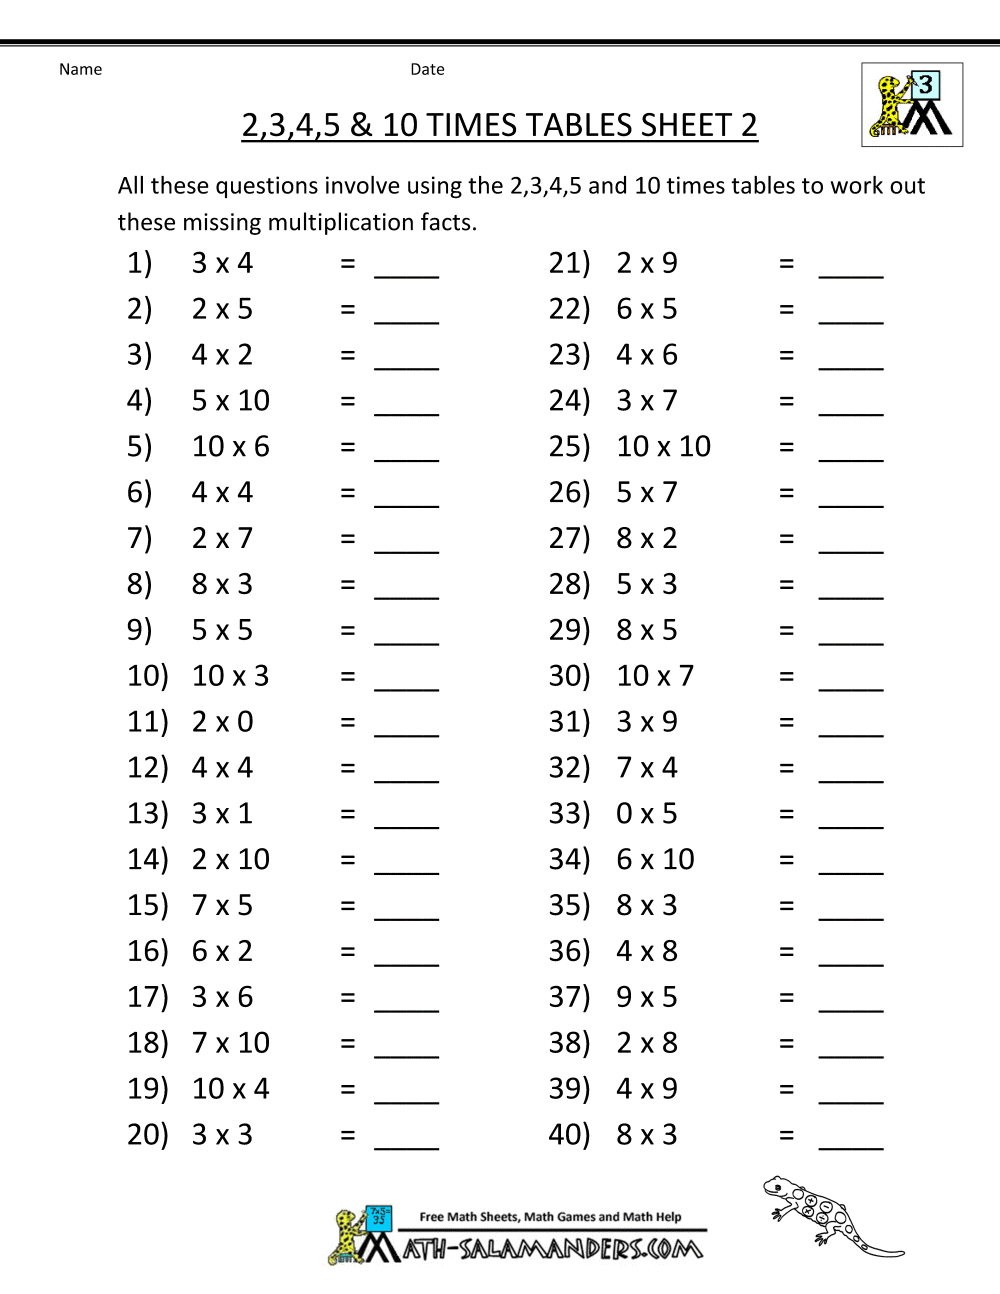 Times Tables Worksheets Pdf